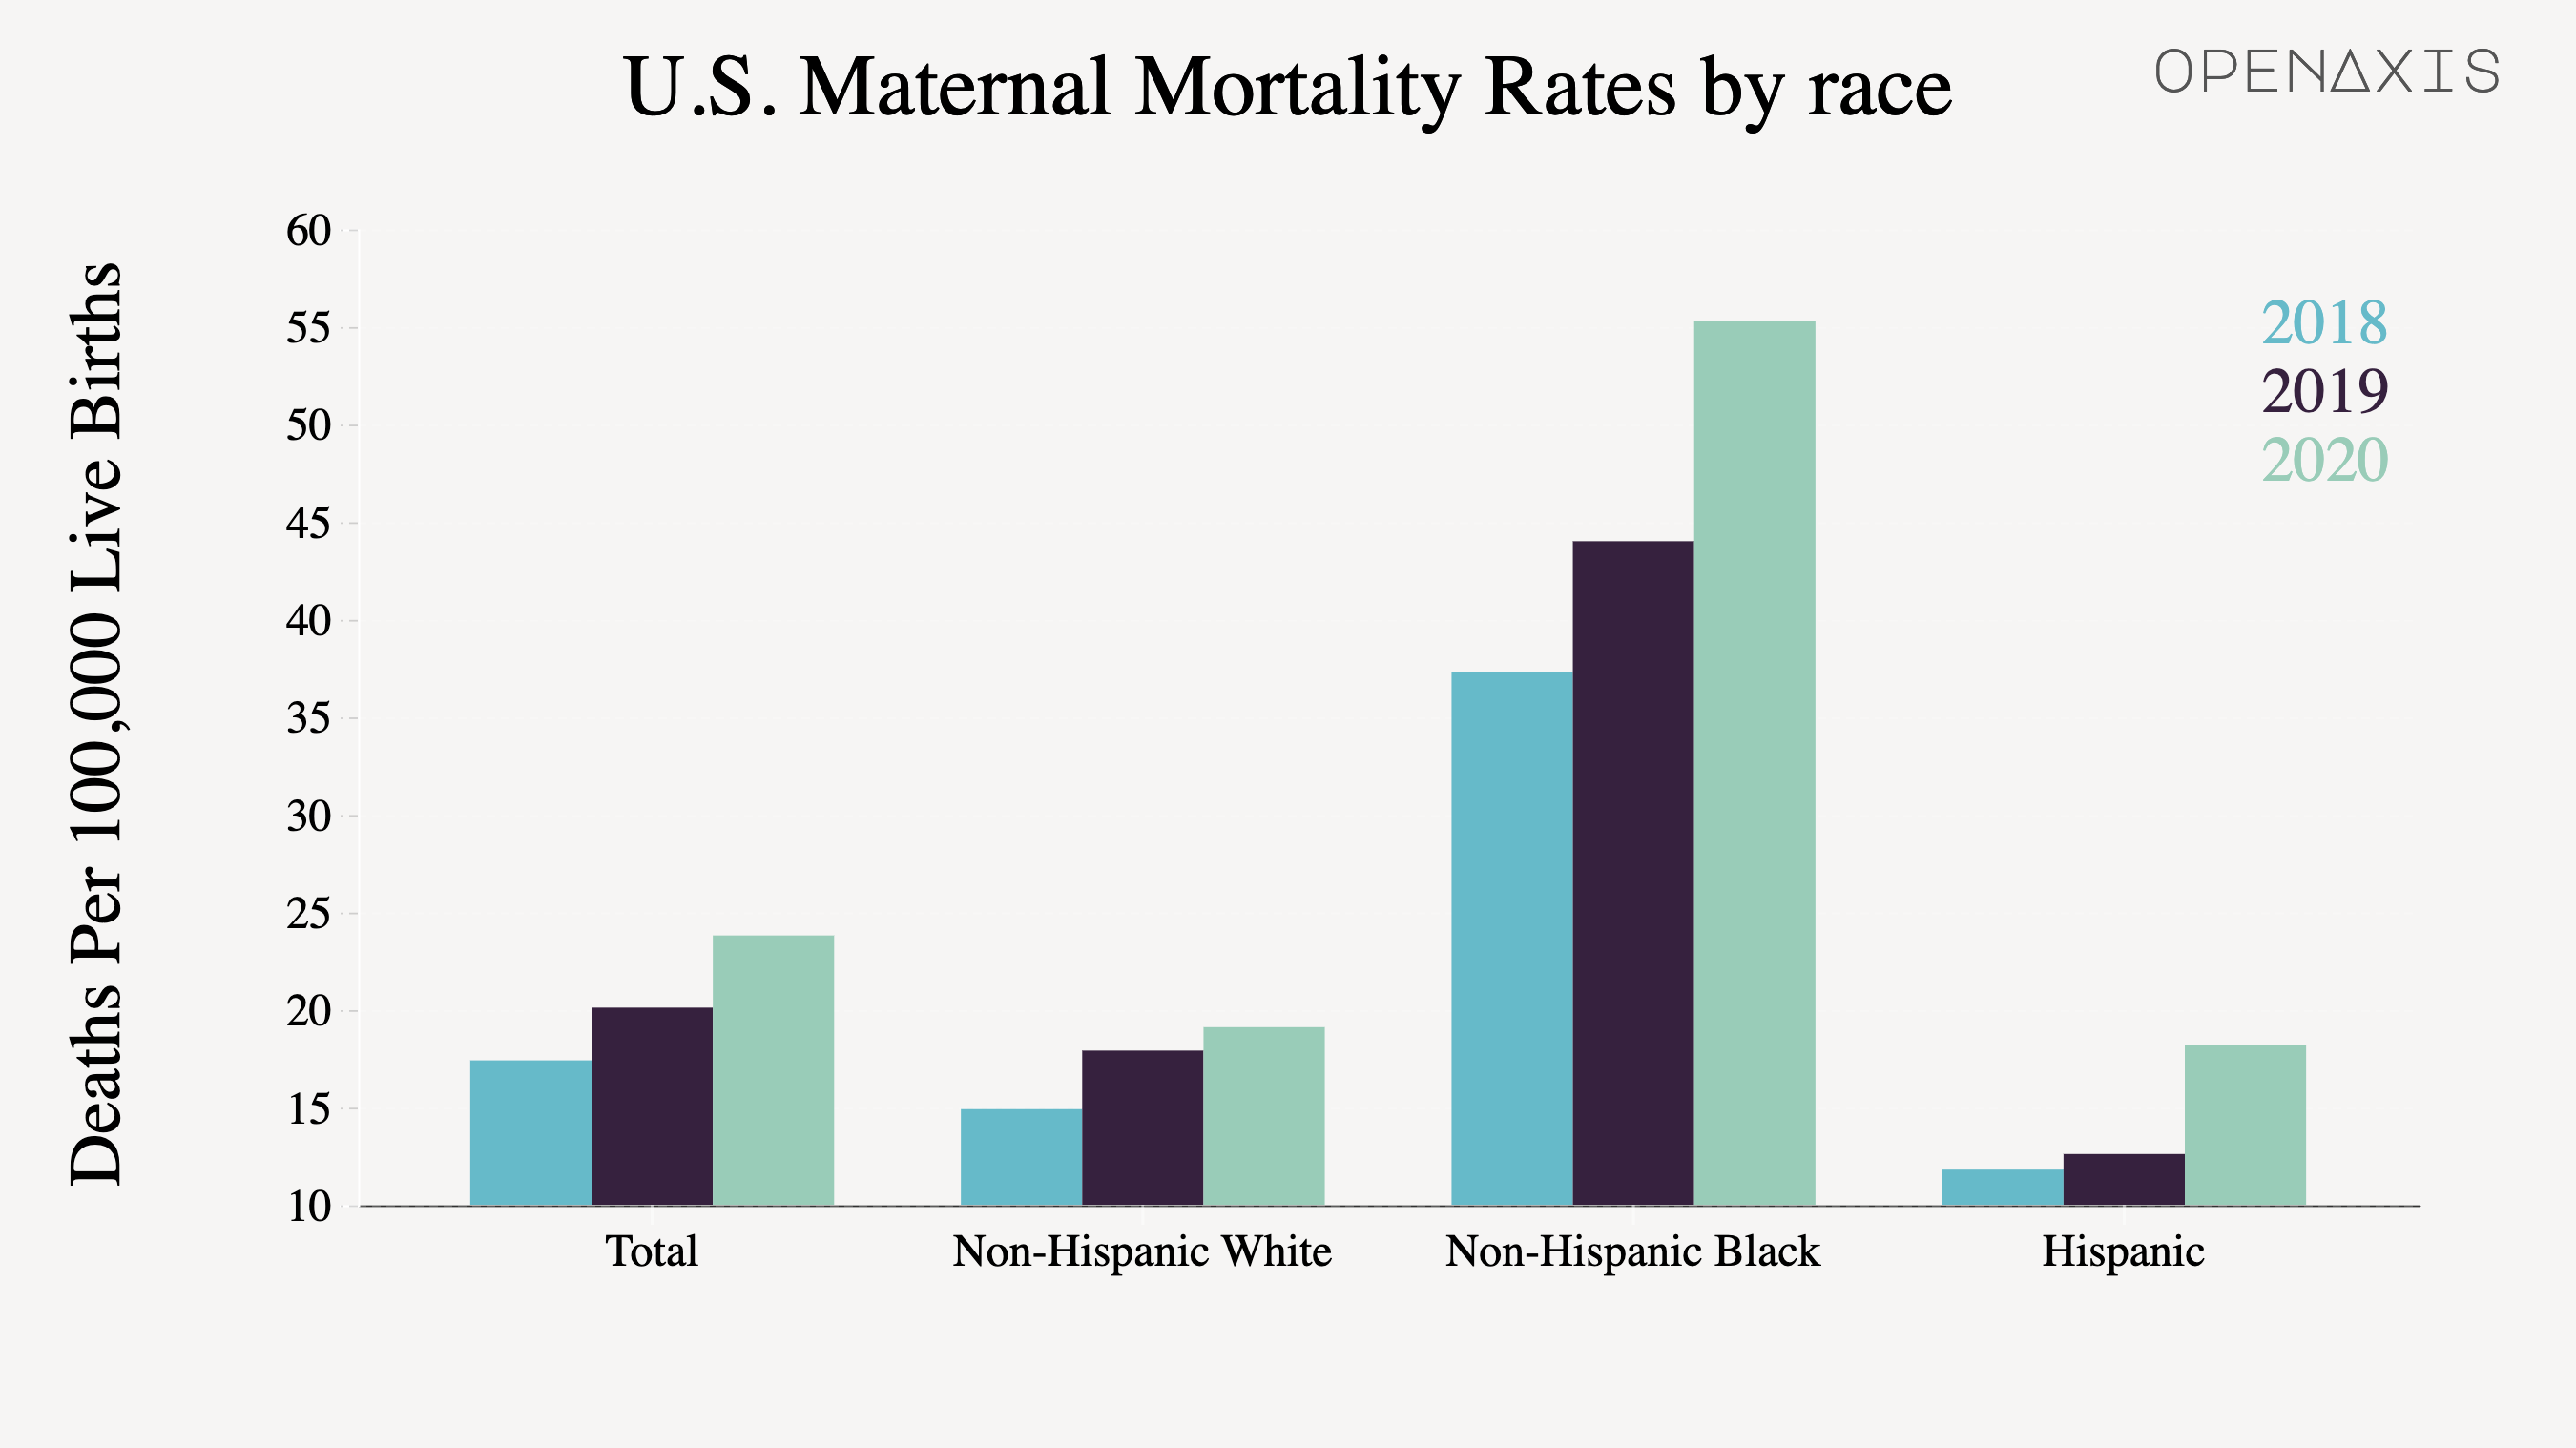 <p>Figure shows the maternal mortality rates, by race and Hispanic origin in the United States, from 2018–2020.</p><p><br /></p><p>﻿<a href="/search?q=%23reproductivehealth" target="_blank">#reproductivehealth</a>﻿ </p><p><br /></p><p>Source: <a href="https://www.cdc.gov/nchs/data/hestat/maternal-mortality/2020/maternal-mortality-rates-2020.htm#anchor_1559670094897" target="_blank">CDC, National Center for Health Statistics, National Vital Statistics System, Mortality.</a></p>